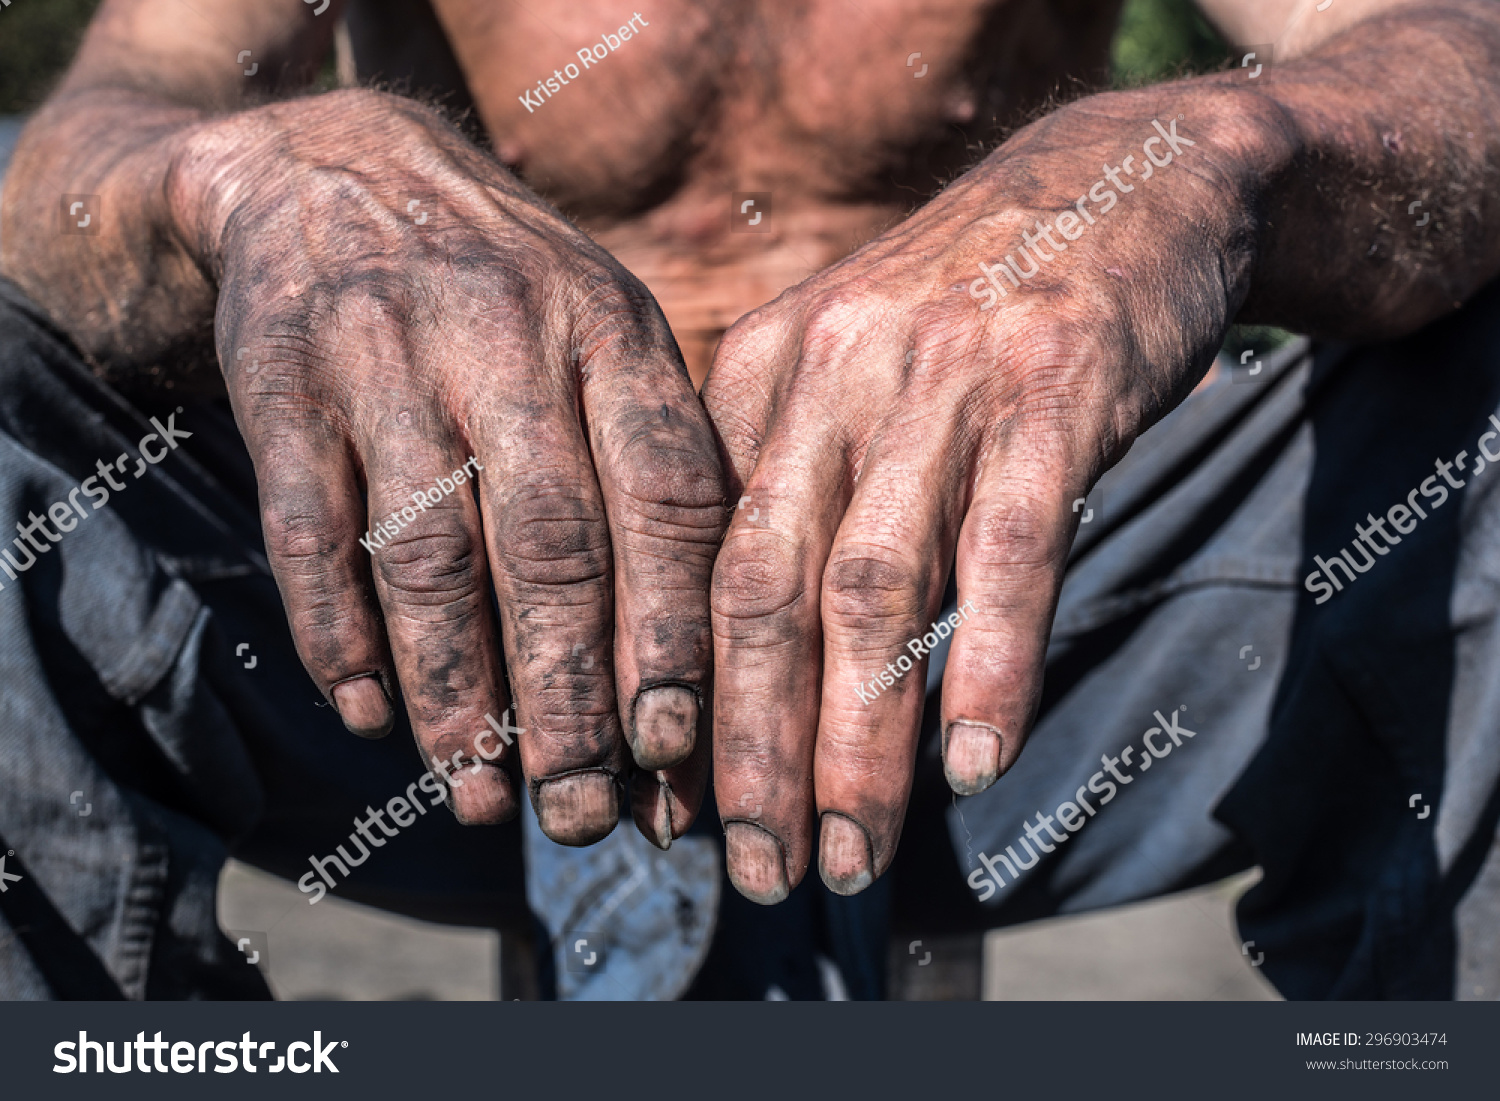 Worker Man with Dirty Hands. Worker Hands. #296903474